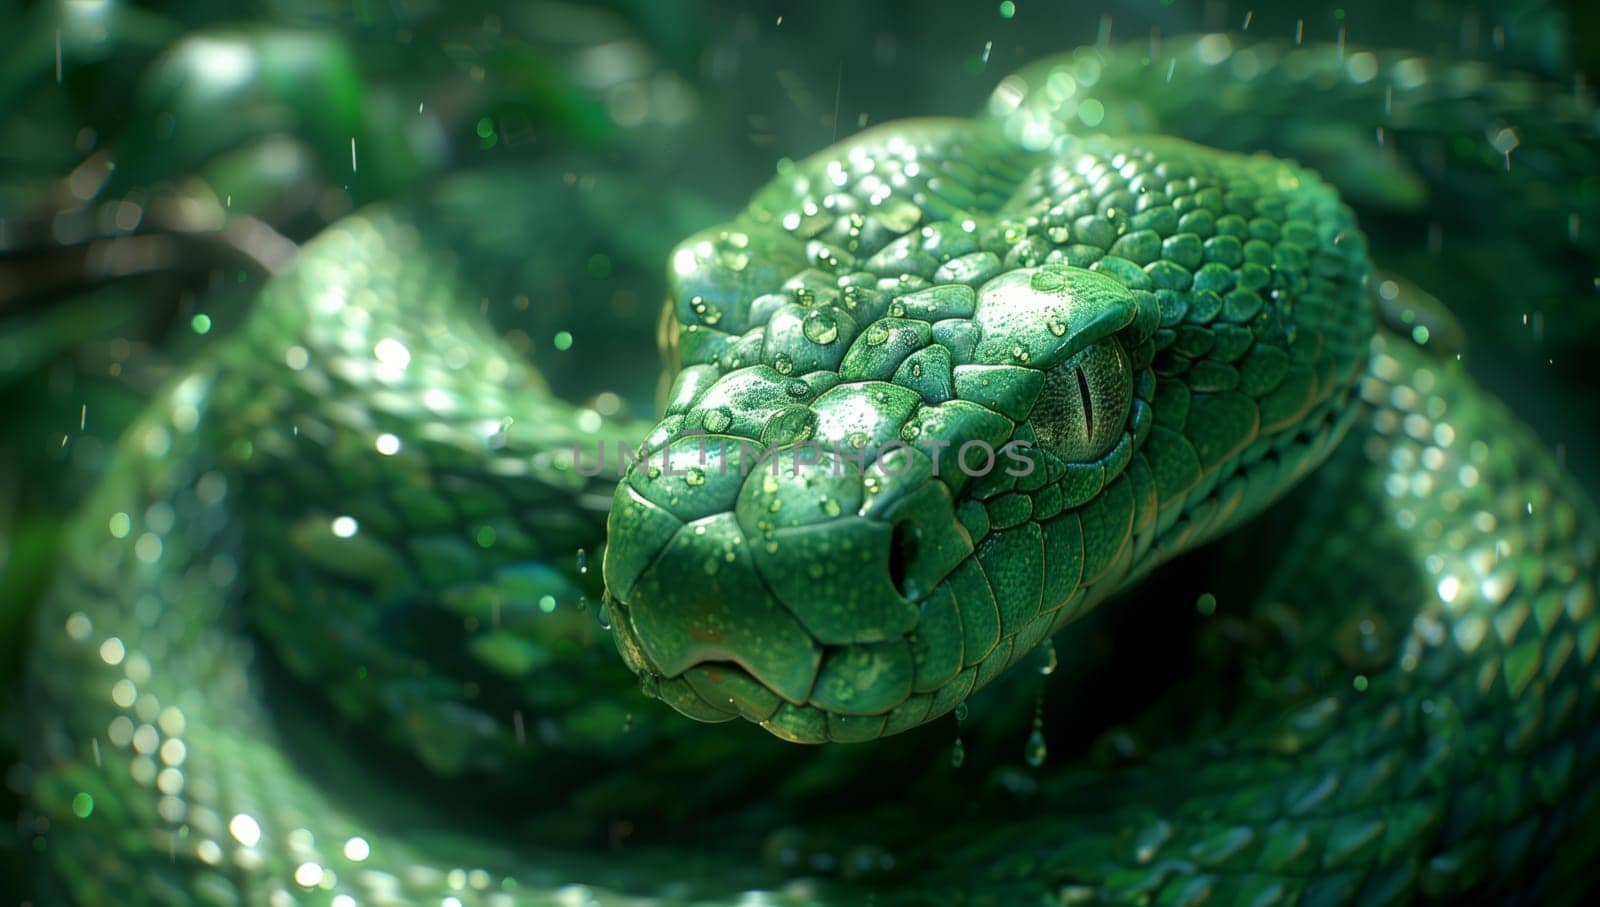 A closeup image of a green scaled reptile, a snake, looking directly at the camera. The snake is surrounded by grass, showcasing its terrestrial habitat